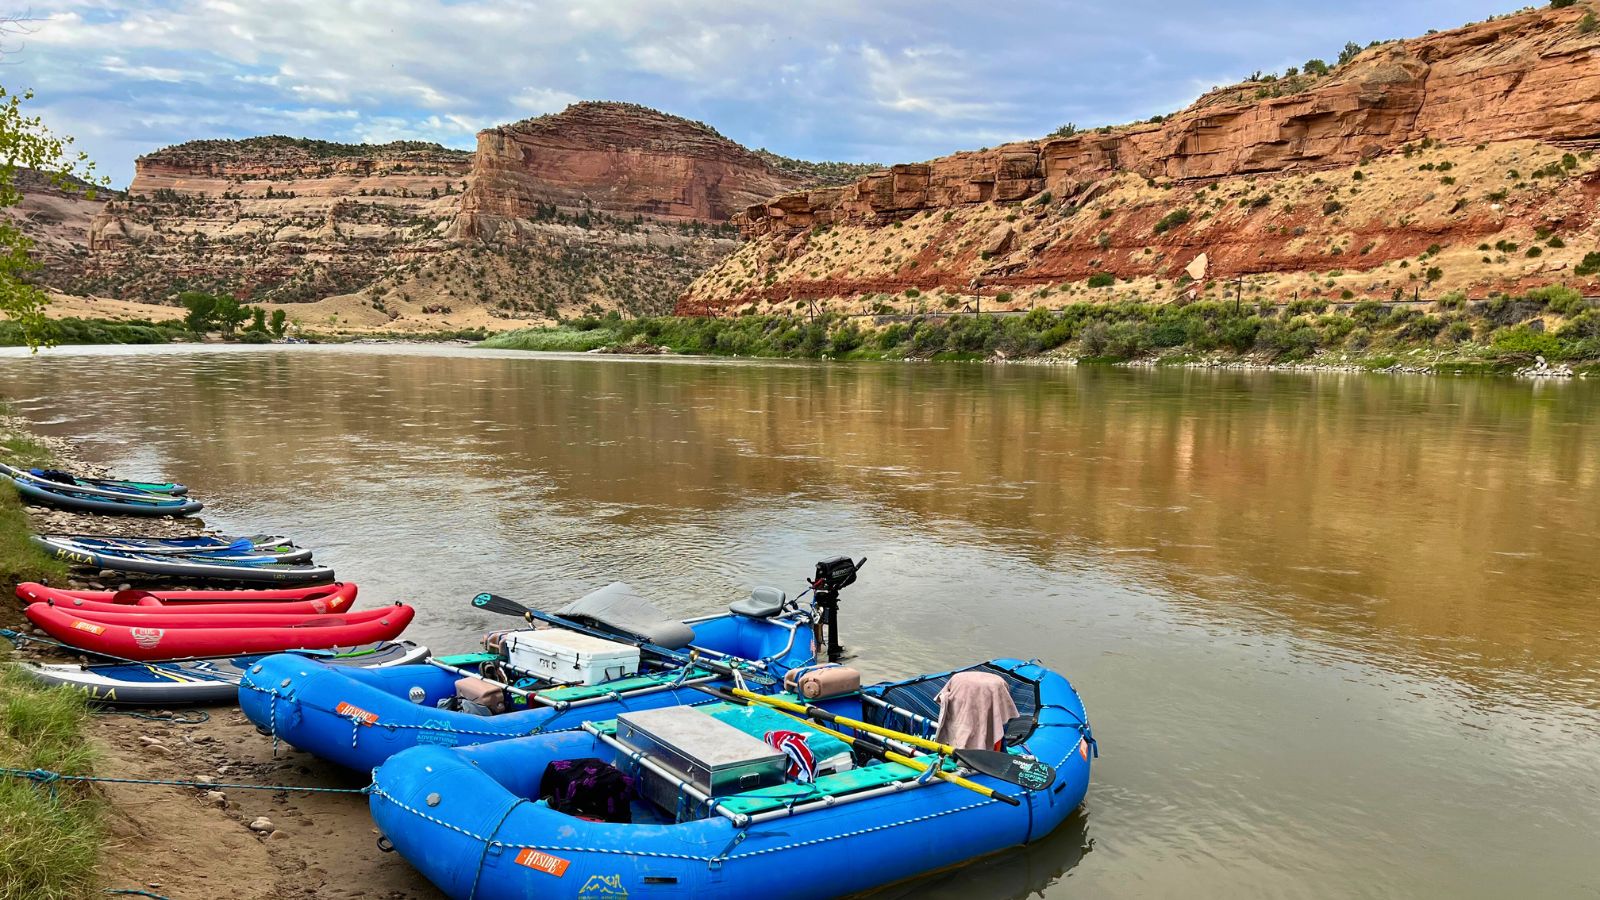 <p>While you might not think of this mountainous state as a place for water sports, one of the best things to do in Colorado is <a href="https://thehappinessfxn.com/grand-junction-rafting-trip/">go whitewater rafting</a>! All along the winding Colorado River, there are loads of whitewater <a href="https://gjadventures.com/" rel="nofollow noopener">rafting experiences</a>, ranging from the family-friendly Class I to the adrenaline-pumping Class V. Regardless of the level, though, it’s sure to be a fun ride.</p>